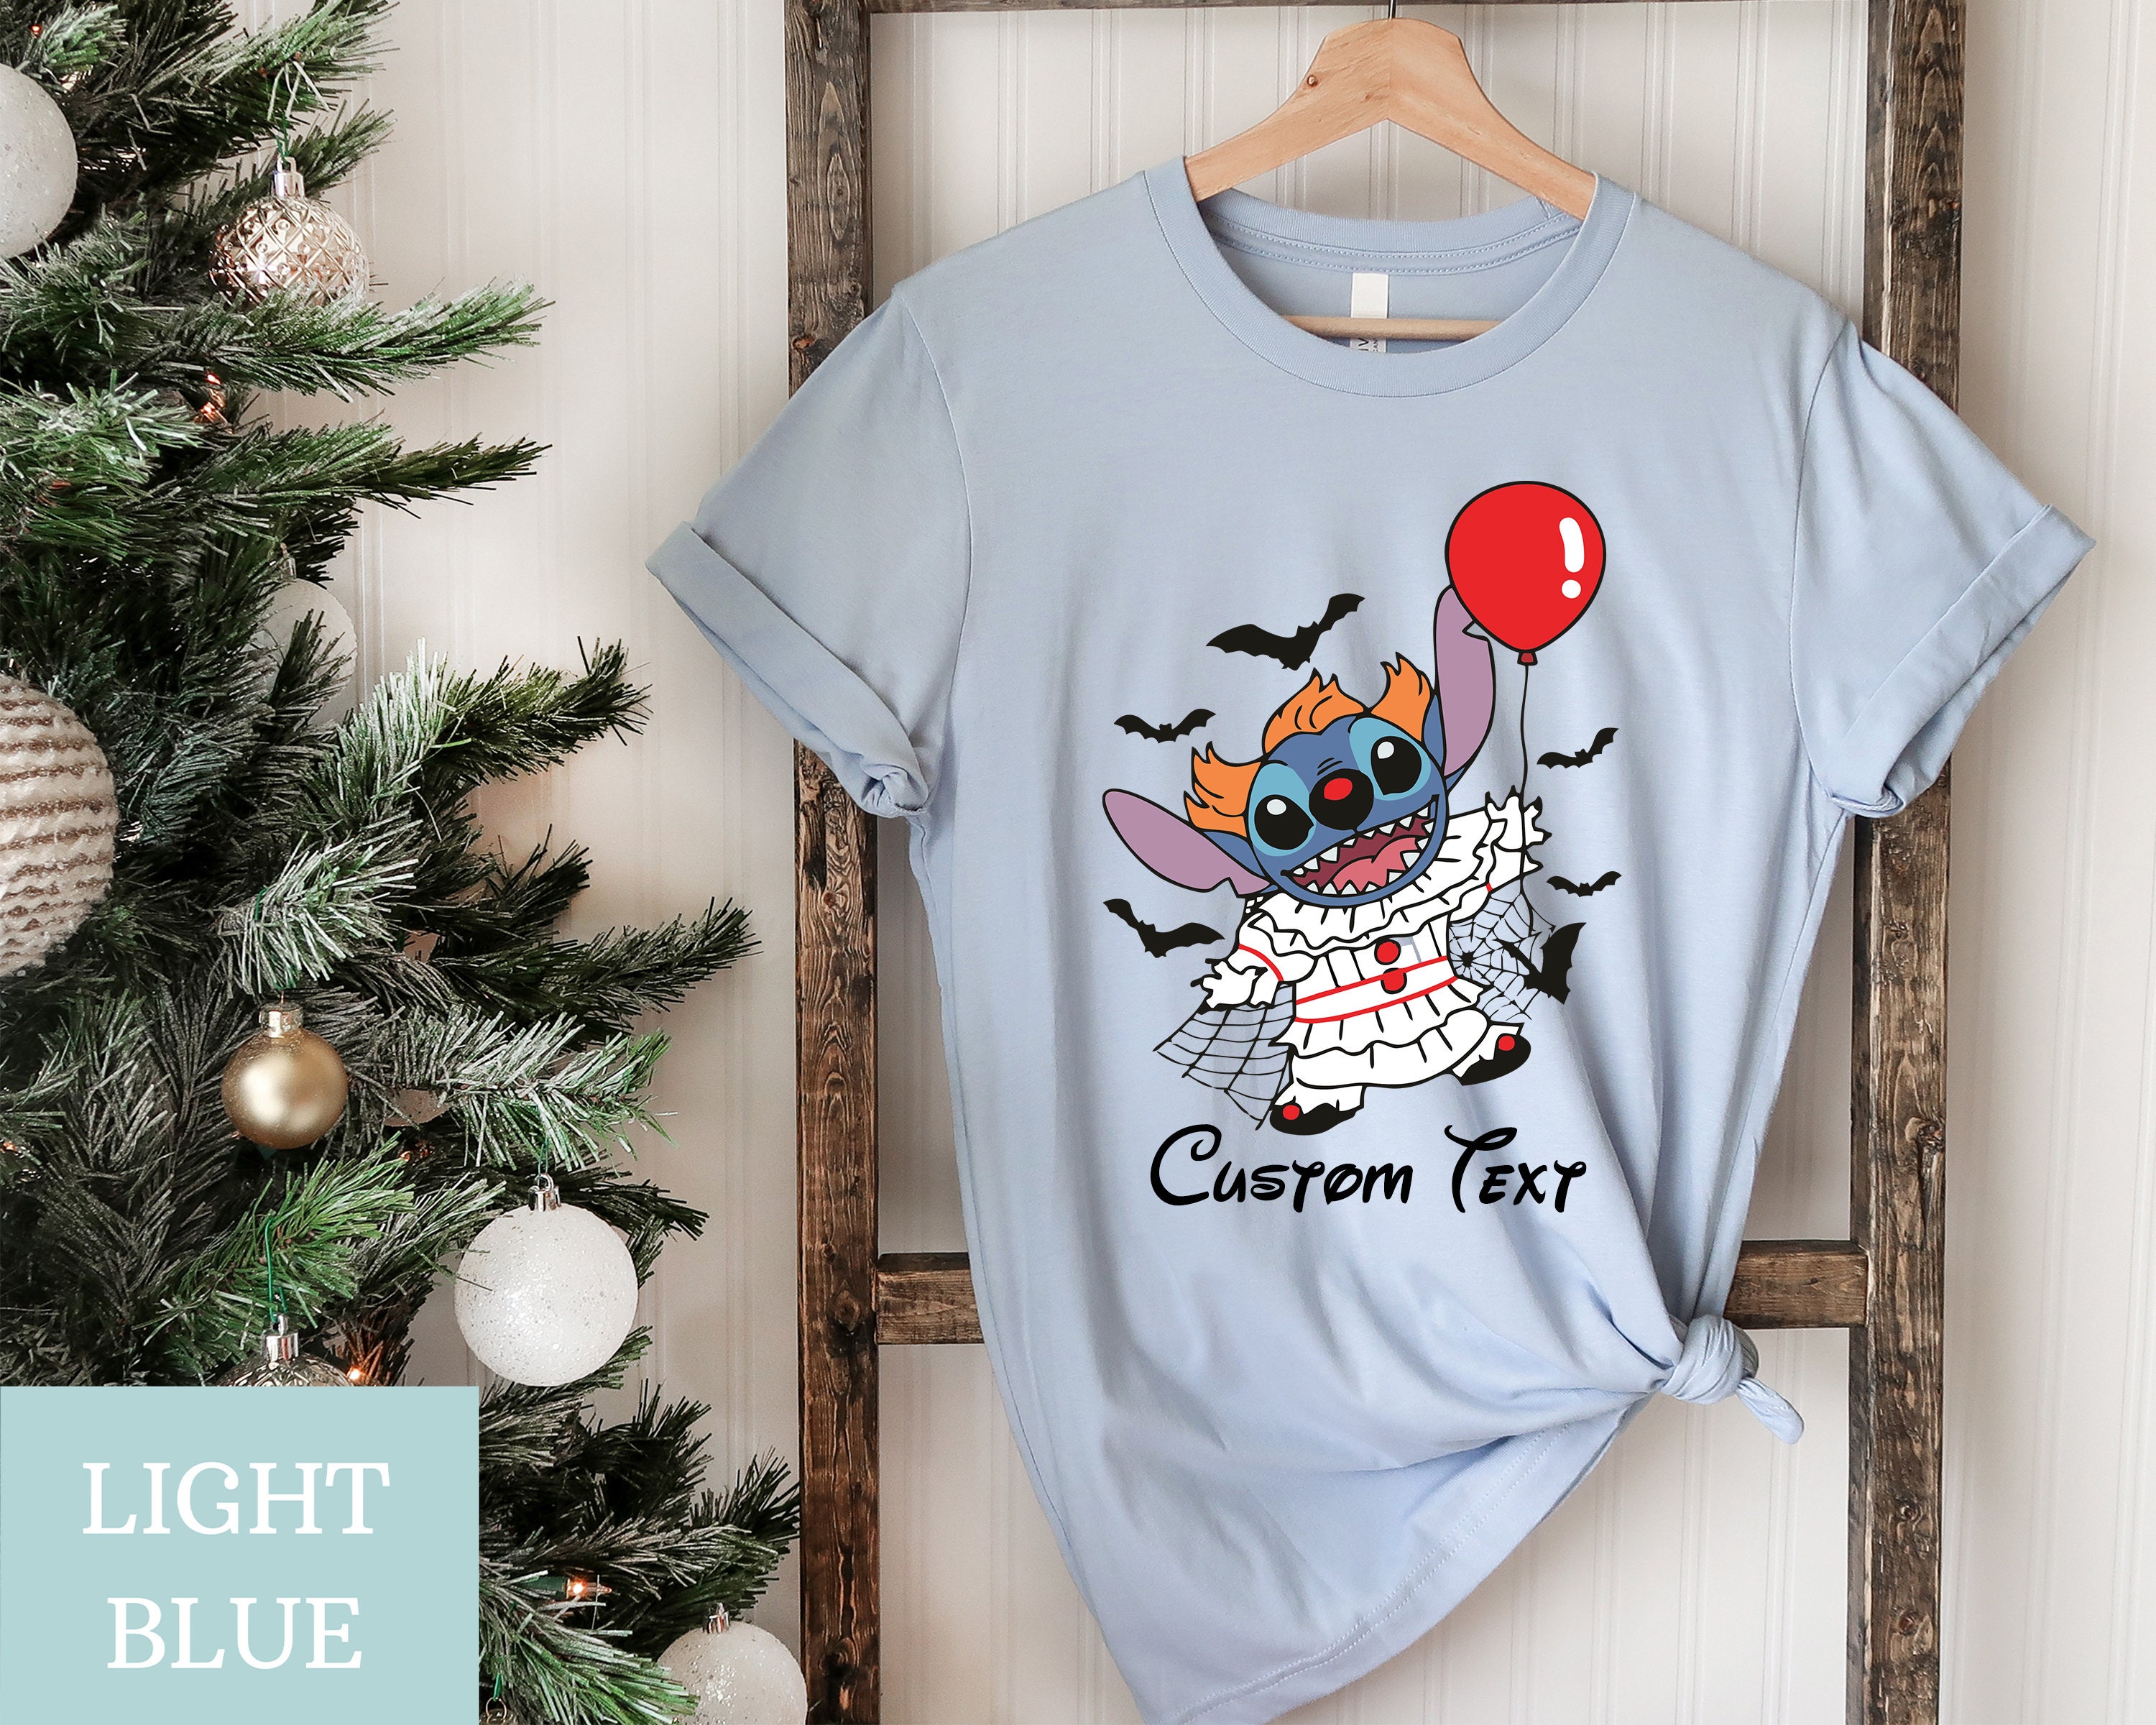 Discover IT Stitch Halloween Shirt, Stitch Horror Halloween Shirt, Halloween Party Shirt, Horror Film Character, Disney Halloween Family Matching Tee